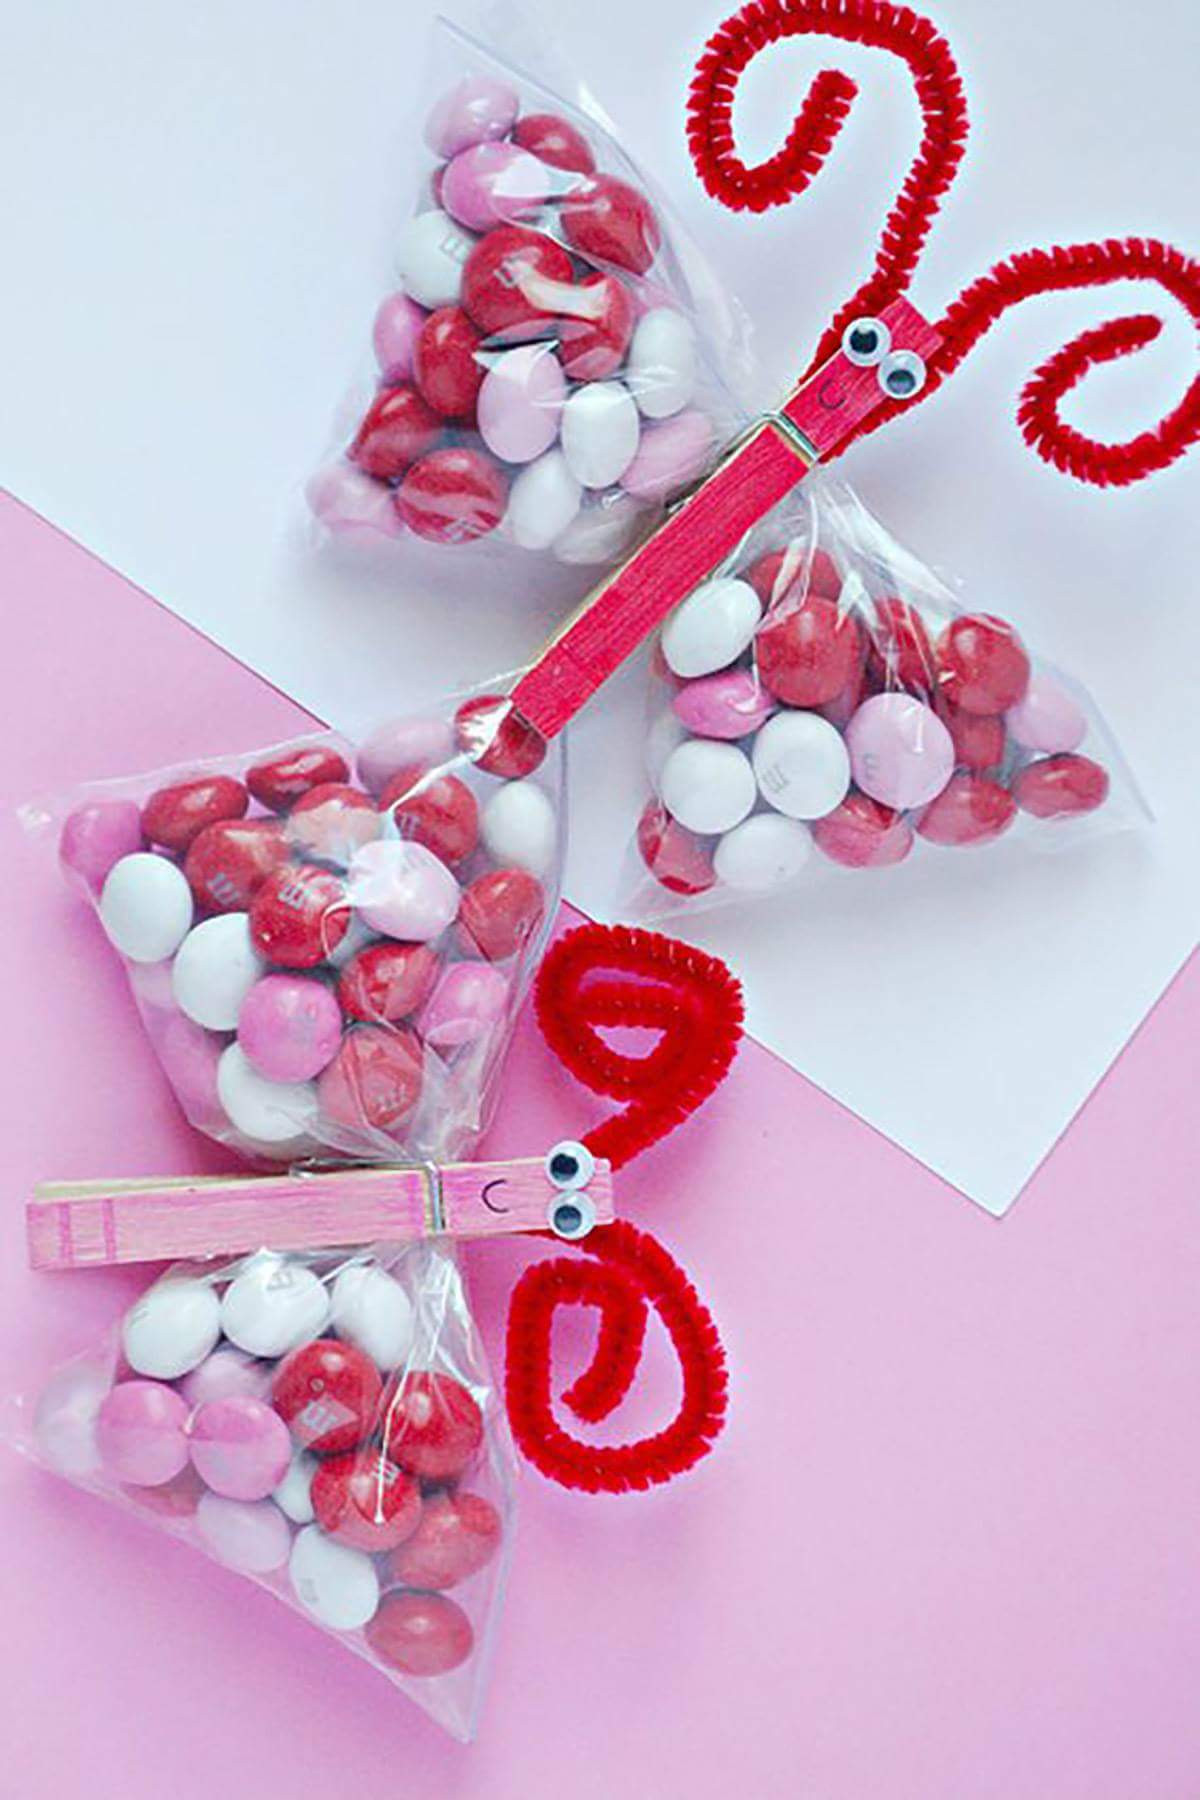 Gift Ideas For First Valentine'S Day
 40 Easy DIY Valentine’s Day Craft Ideas to Make Your